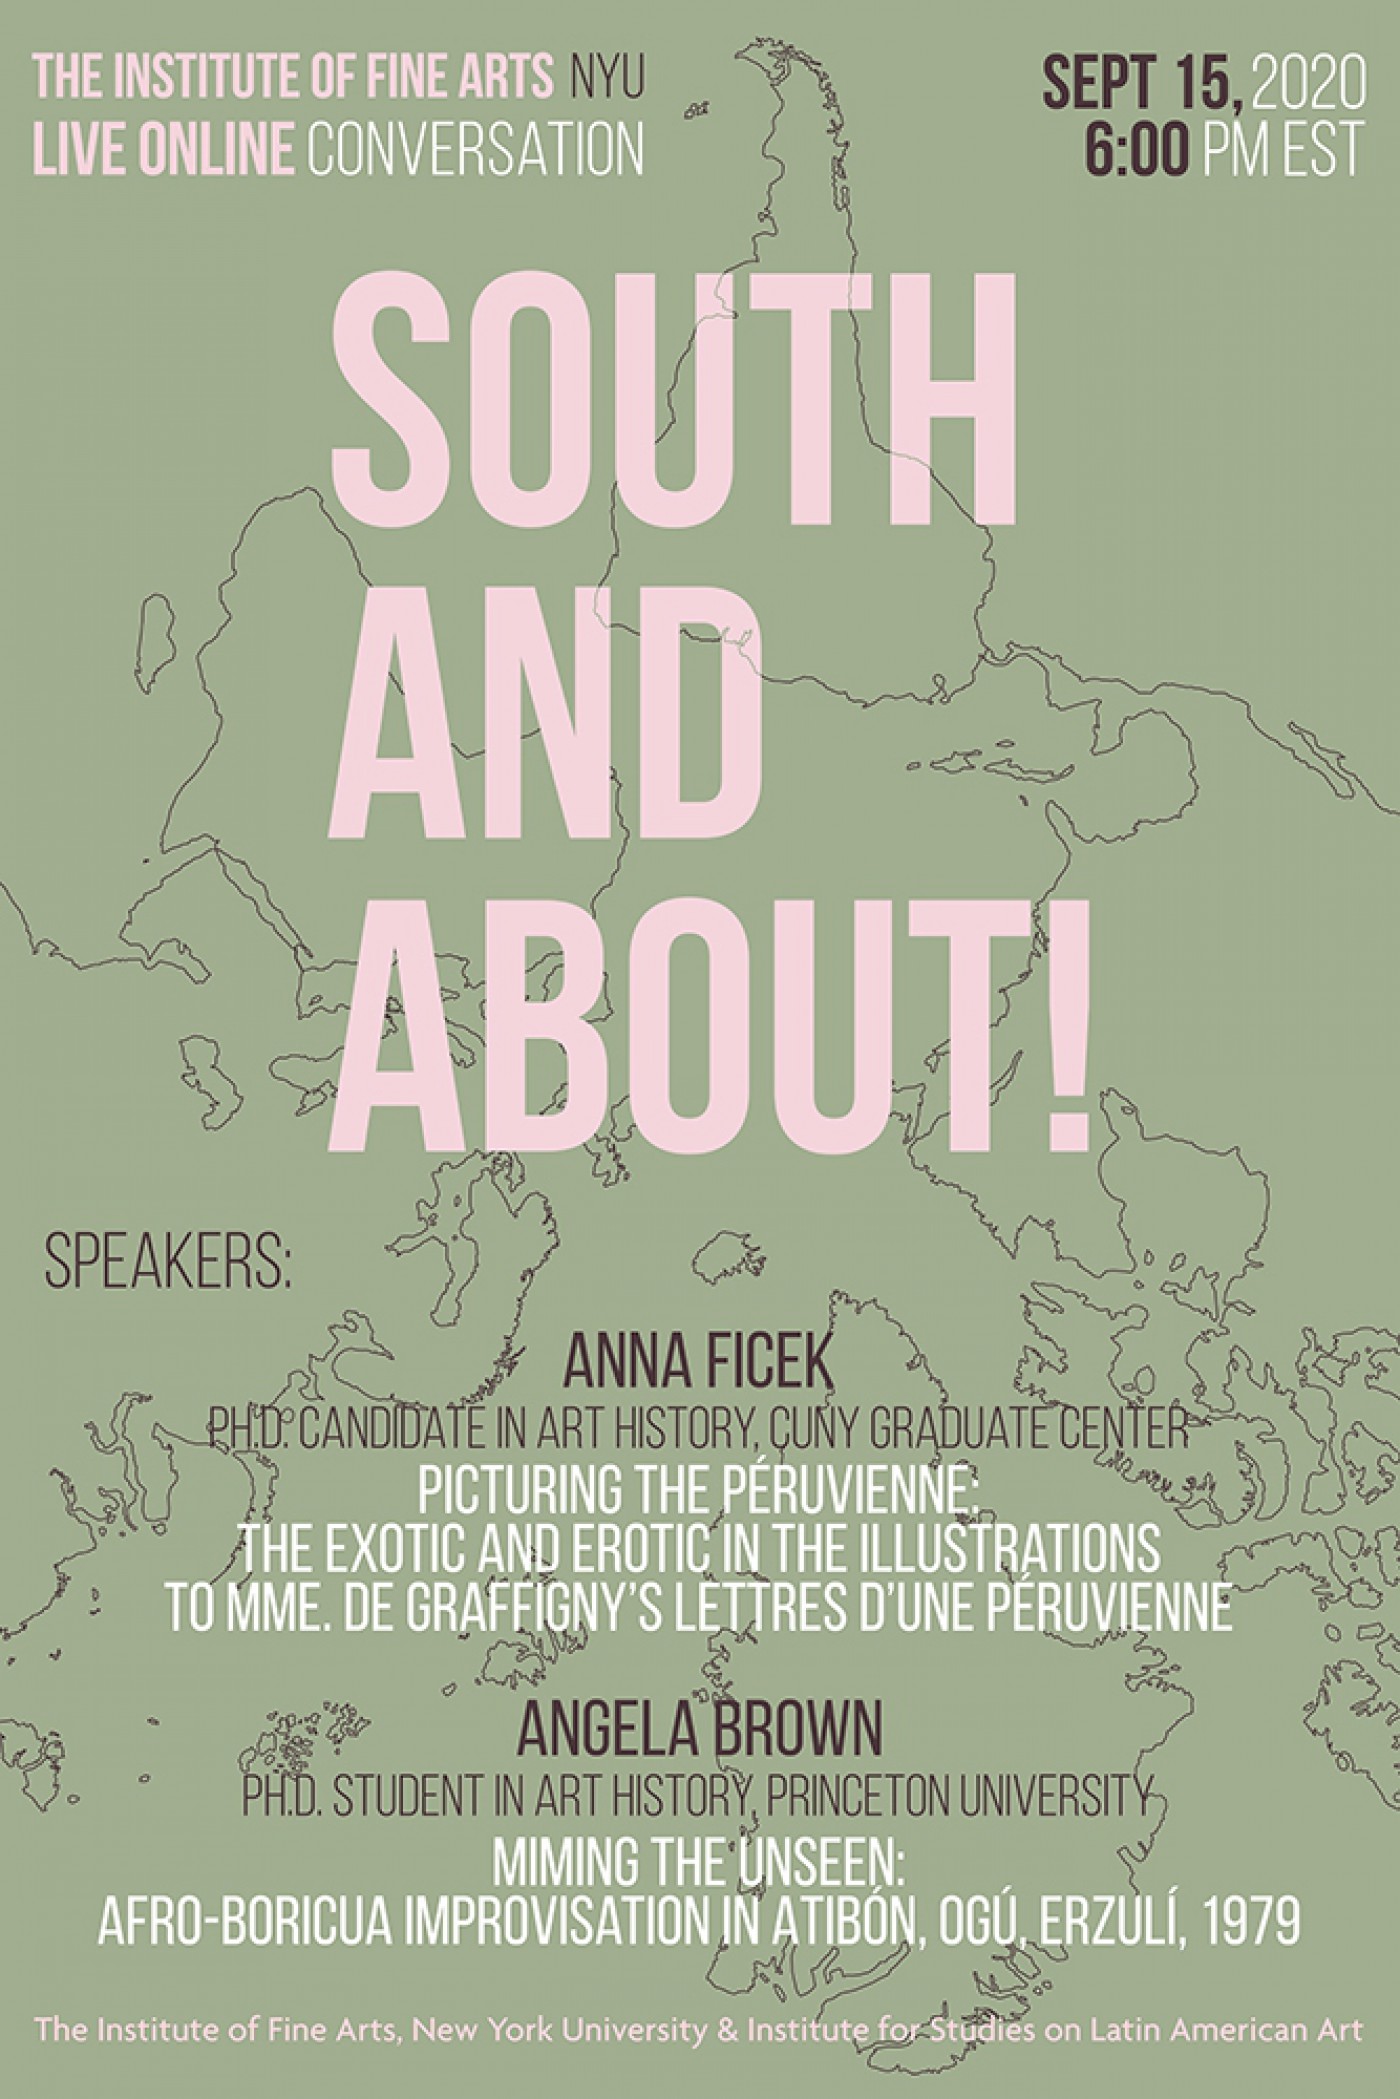 Event poster with bold text over a background of an upside down world map.